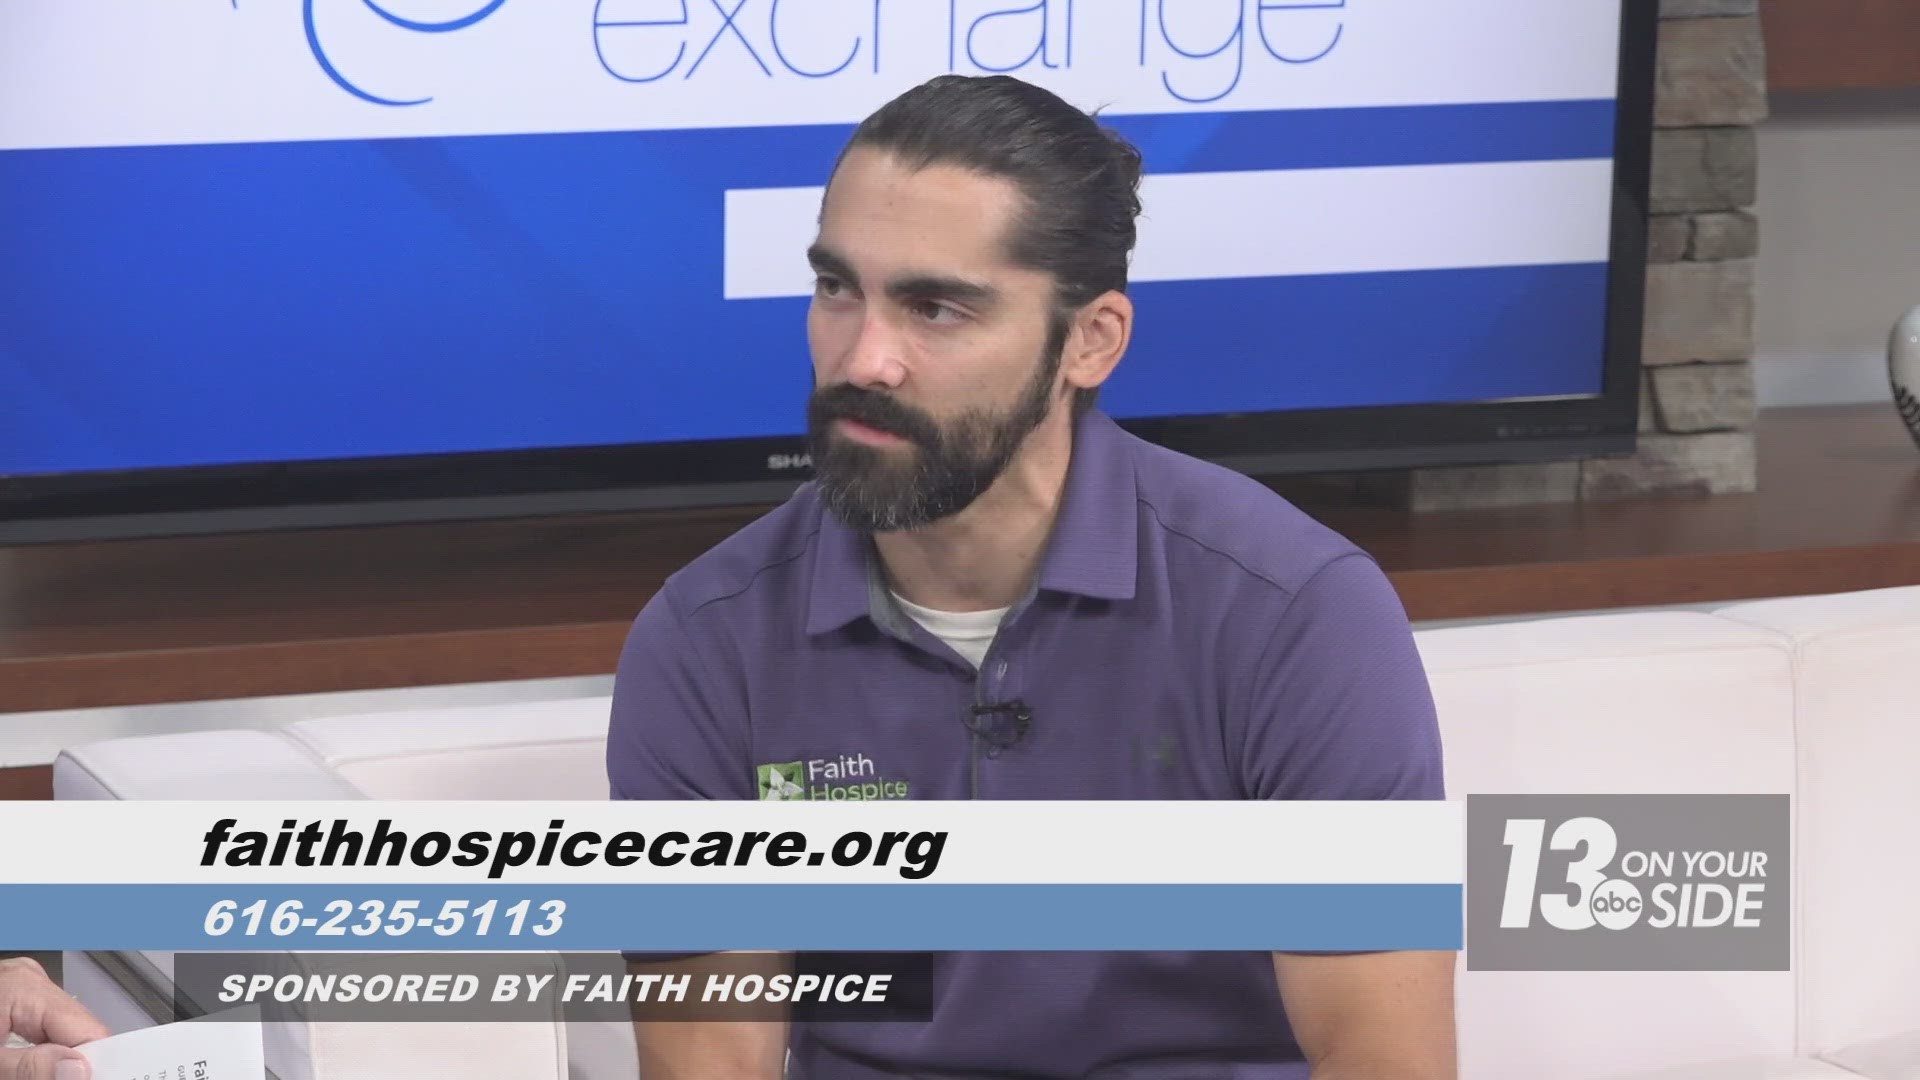 We sat down with Ben Jacobs, team manager for Faith Hospice, and he explained what hospice care entails and how it’s delivered at Faith Hospice.